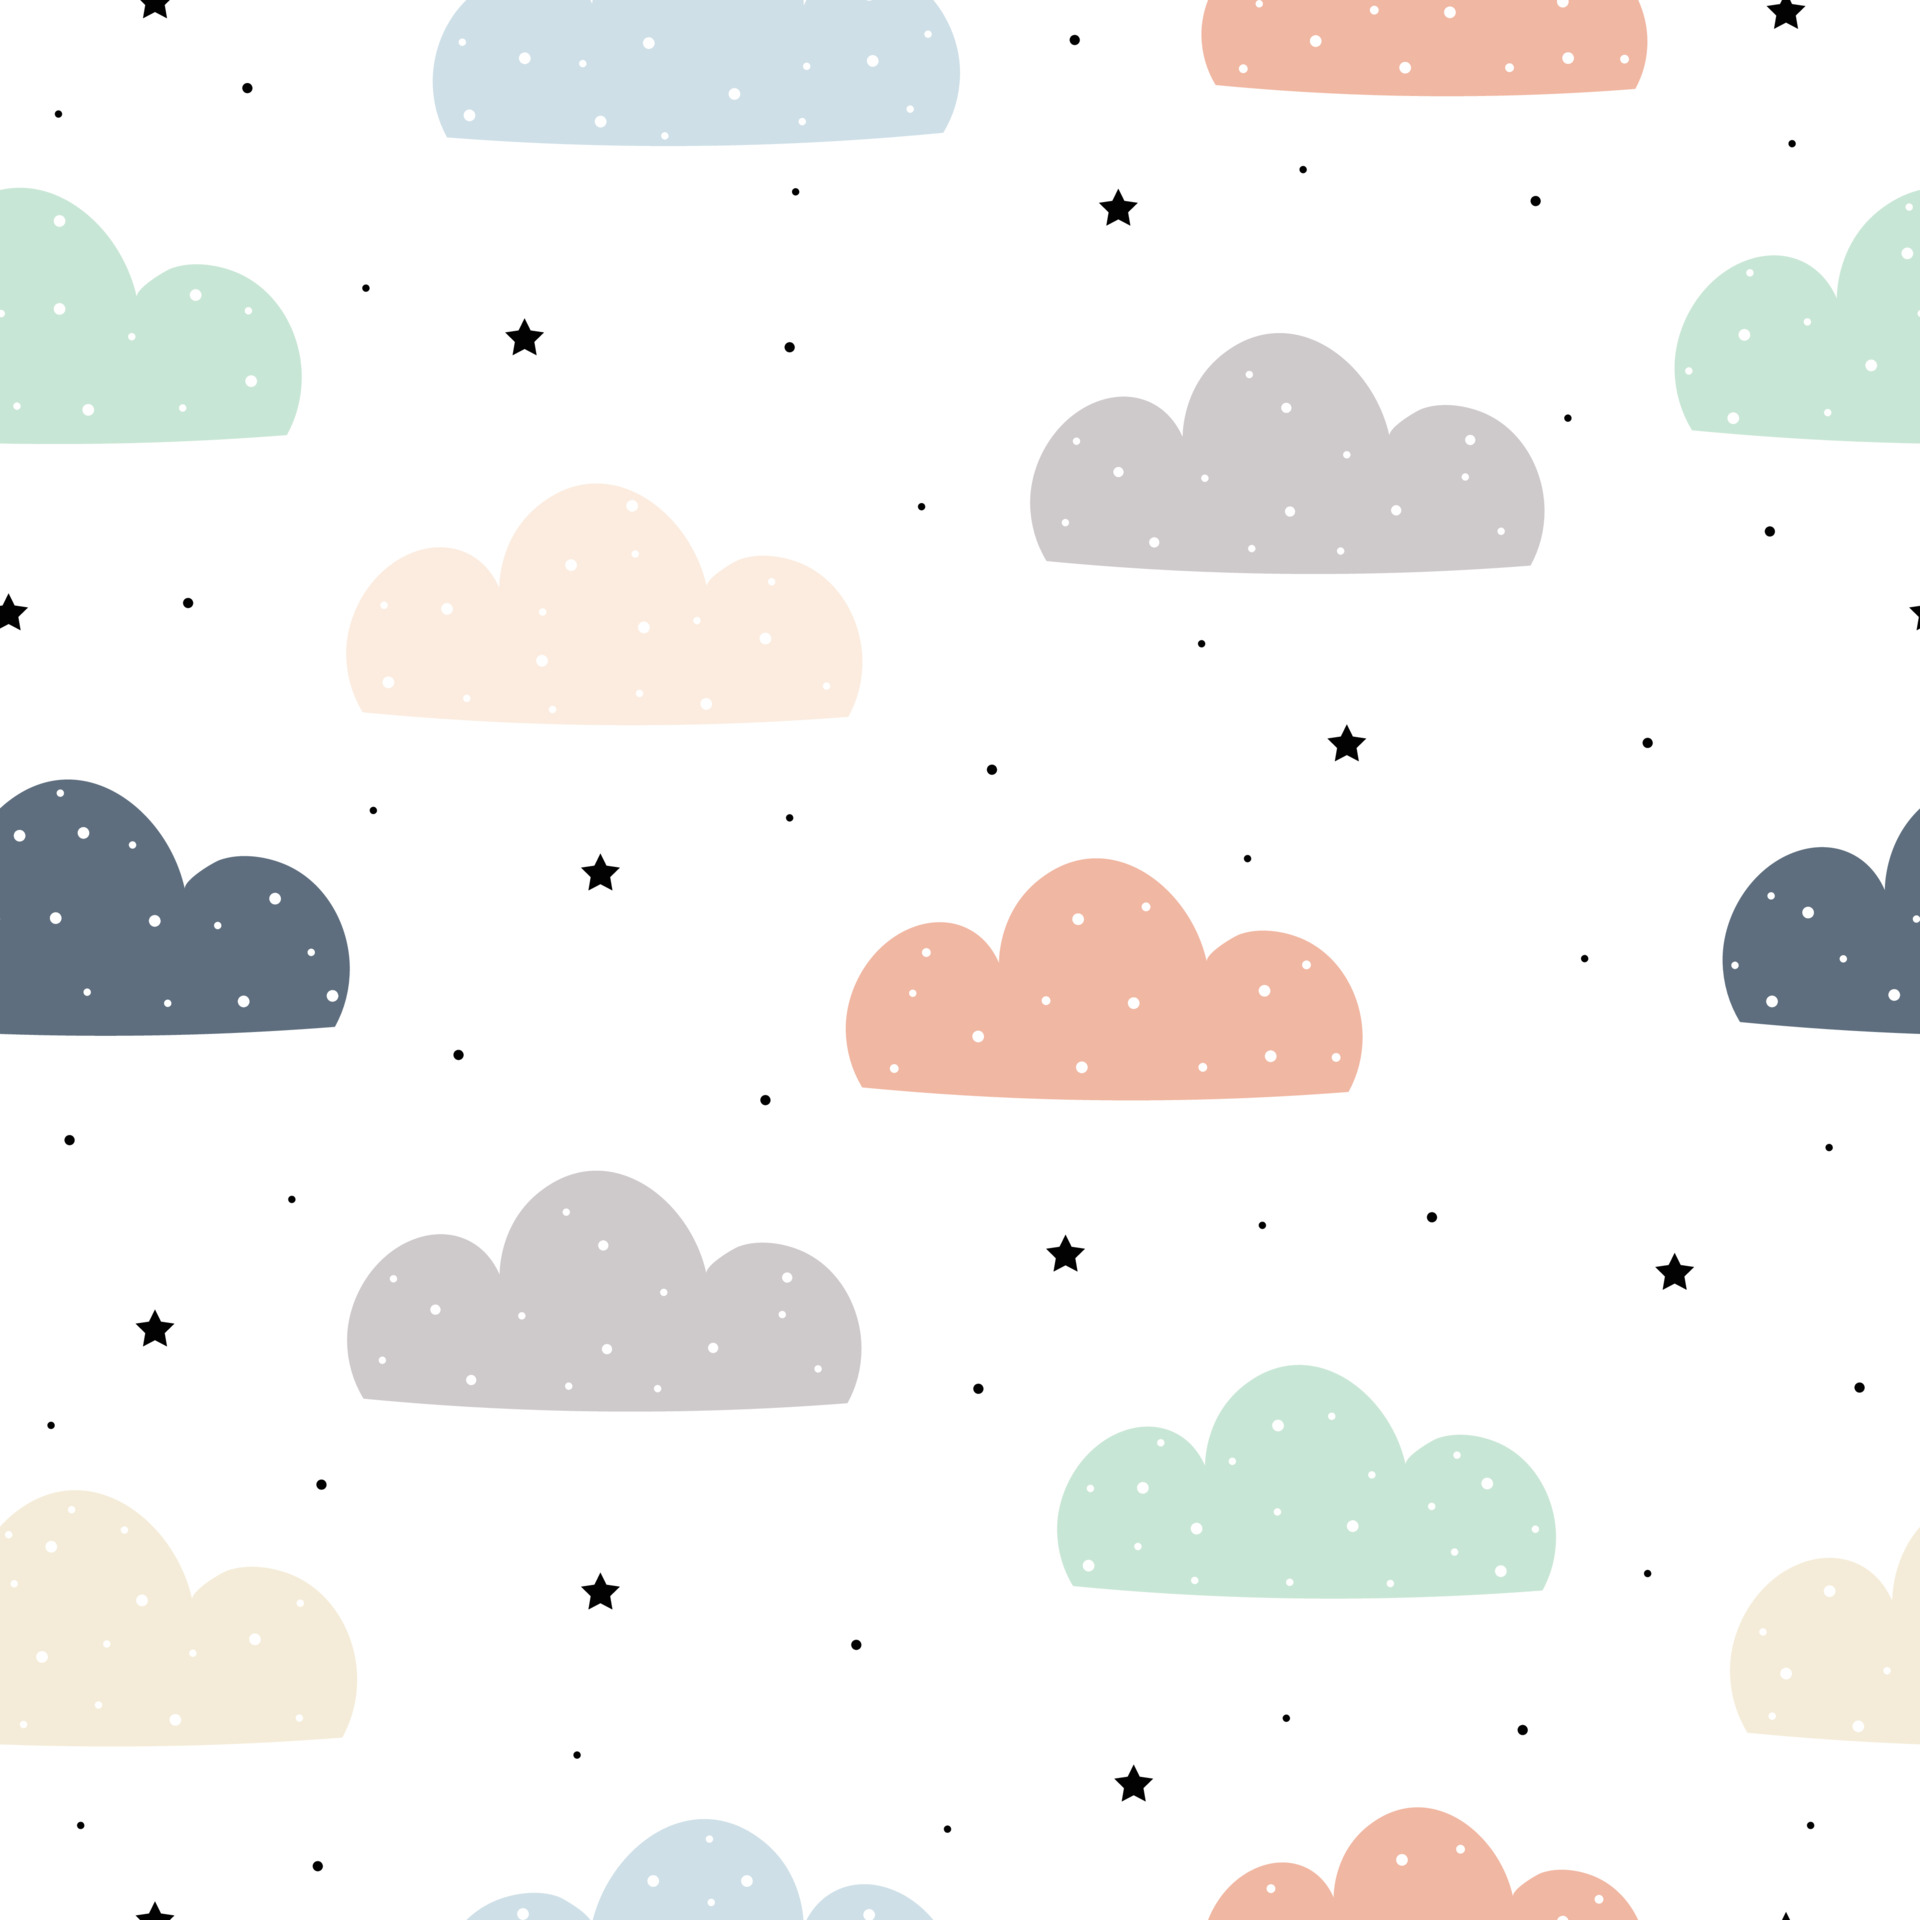 Pastel Aesthetic Clouds Pink Images  Free Photos PNG Stickers Wallpapers   Backgrounds  rawpixel